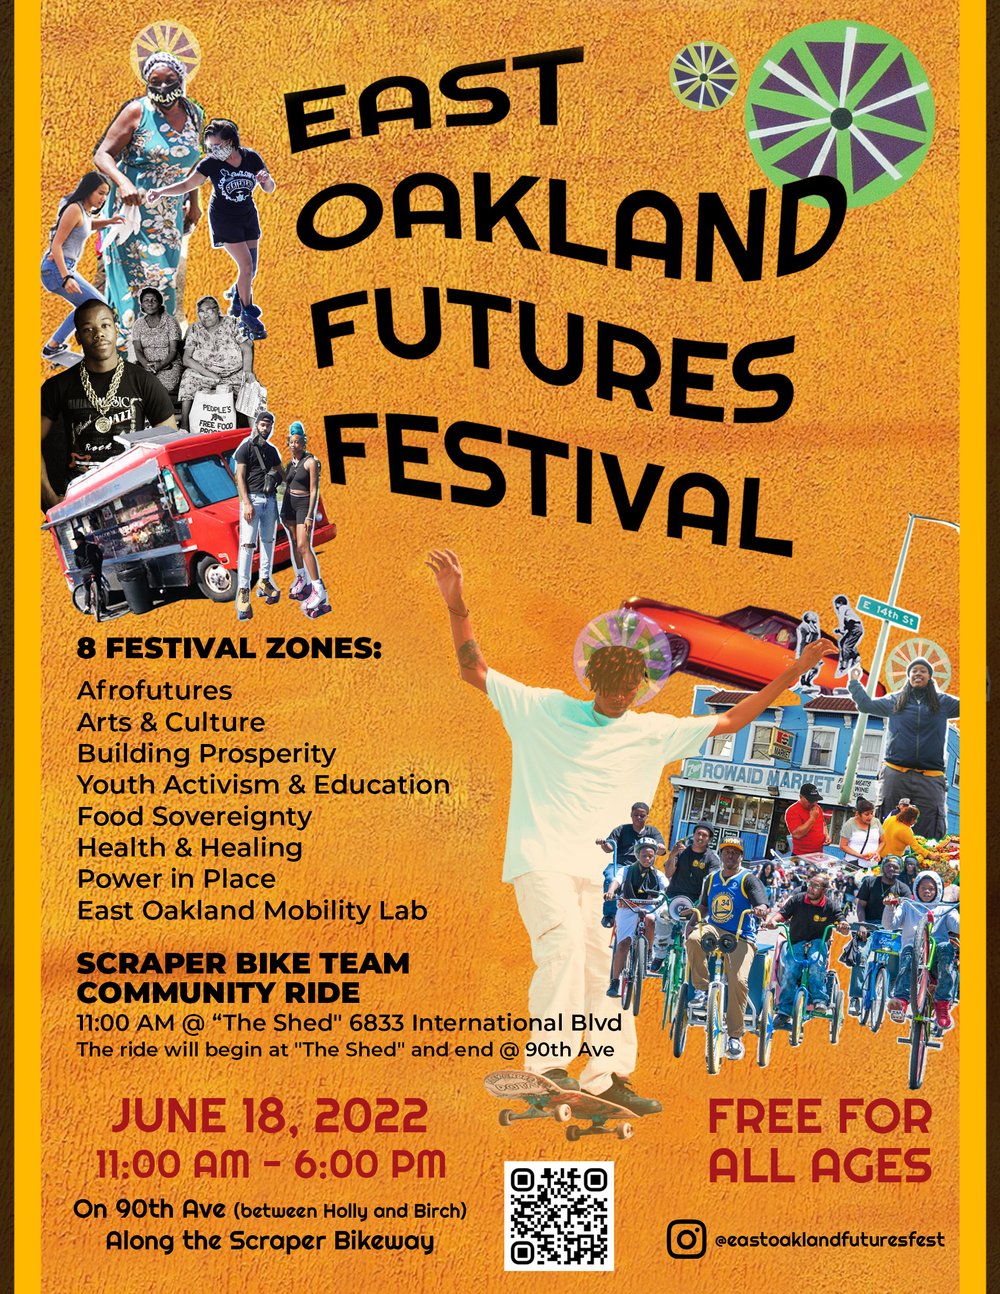 East Oakland Futures Festival

8 Festival Zones
Afrofutures
Arts & Culture
Building Prosperity
Youth Activism & Education
Food Sovereignty
Health & Healing
Power In Place
East Oakland Mobility Lab

Scraper Bike Team Community Ride
11:00 AM @ "The Shed" 6833 International Blvd.
The ride will begin at "The Shed" and end @ 90th Ave

June 18, 2022
11:00AM - 6:00 PM
On 90th Ave (between Holly and Birch)
Along the Scraper Bikeway

Free for all ages